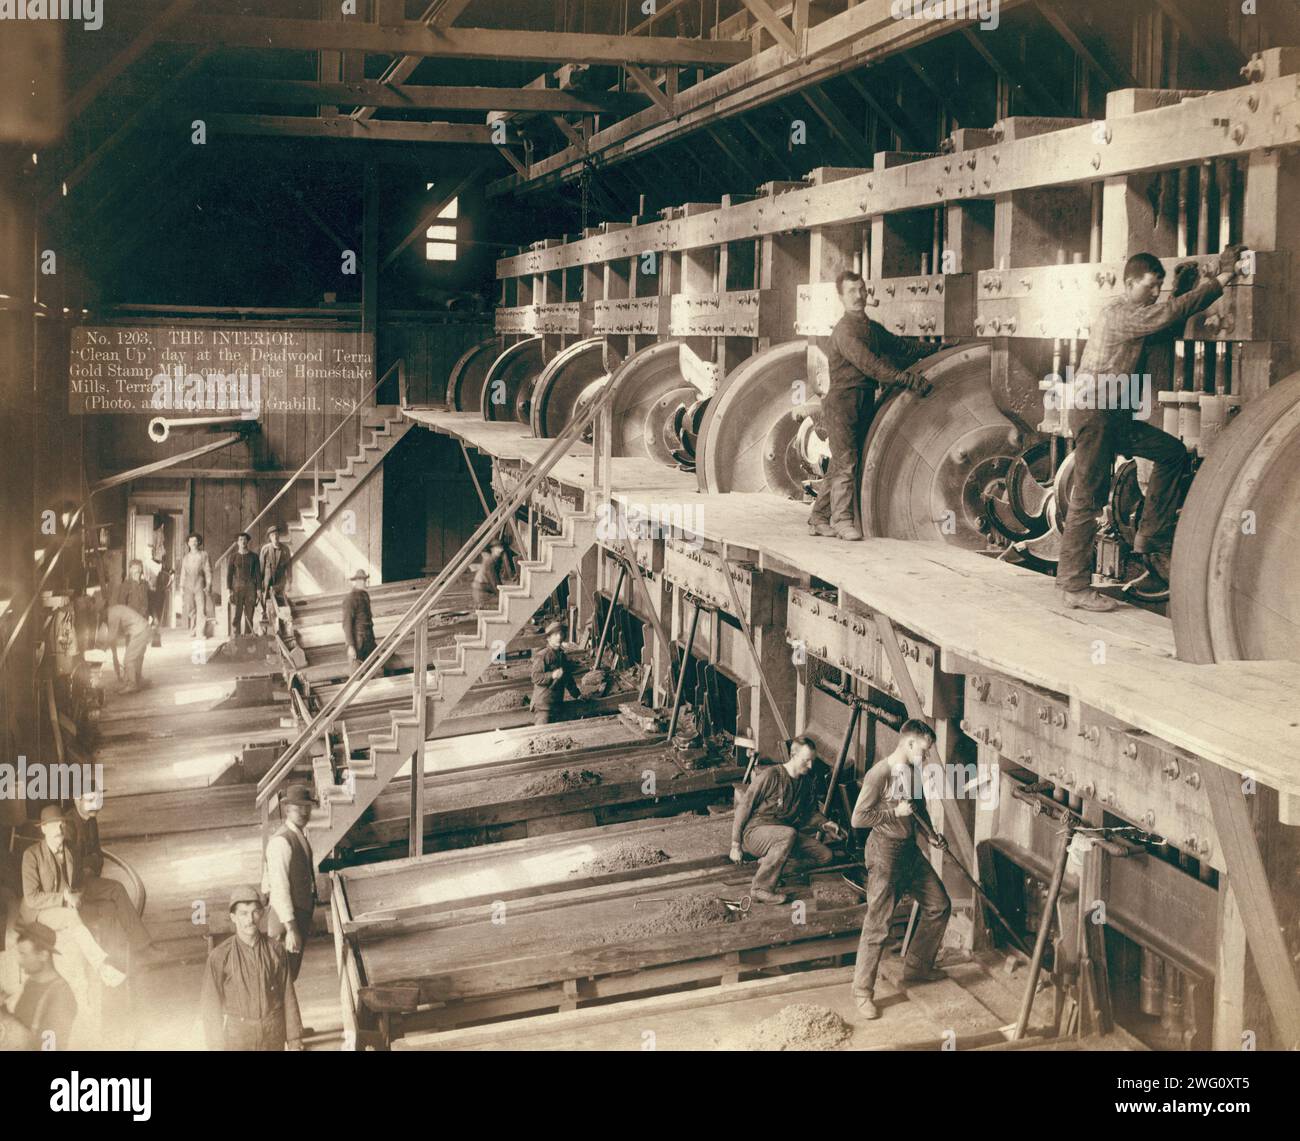 The Interior. &quot;Clean Up&quot; day at the Deadwood Terra Gold Stamp Mill, one of the Homestake Mills, Terraville, Dakota []. Interior of saw mill; men working on equipment. Stock Photo